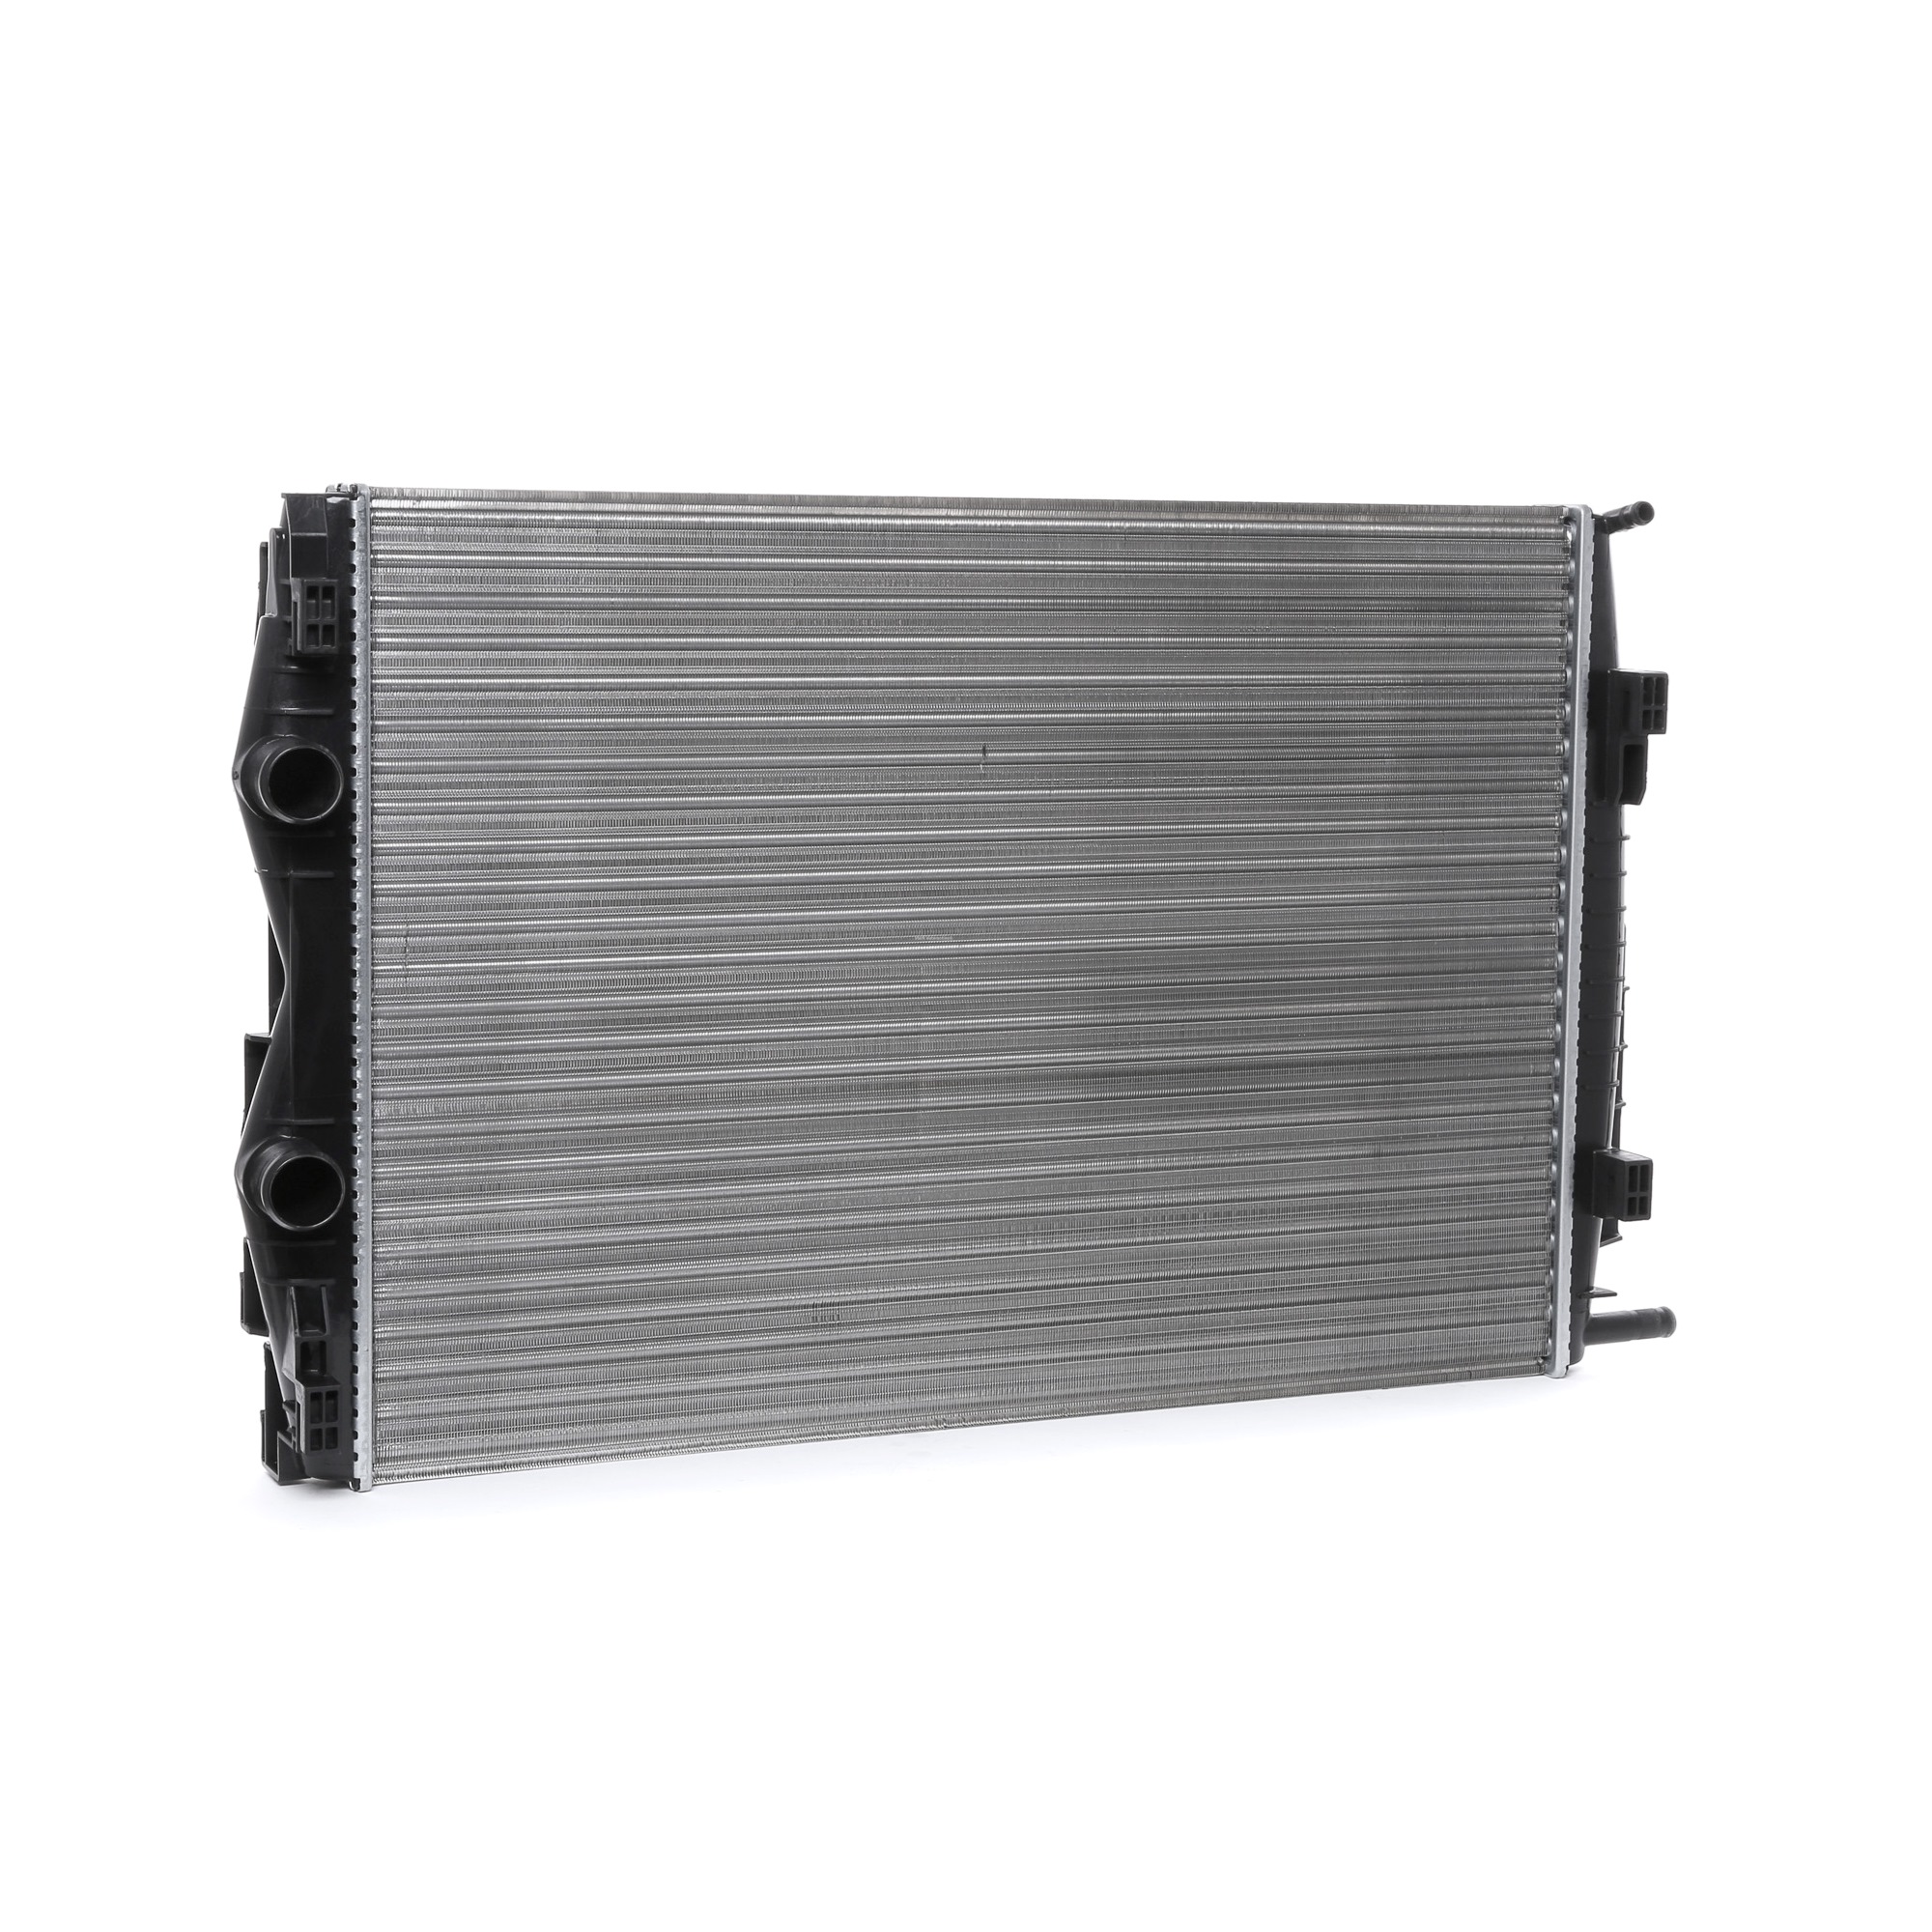 STARK SKRD-0120716 Engine radiator for vehicles with/without air conditioning, for manual transmission